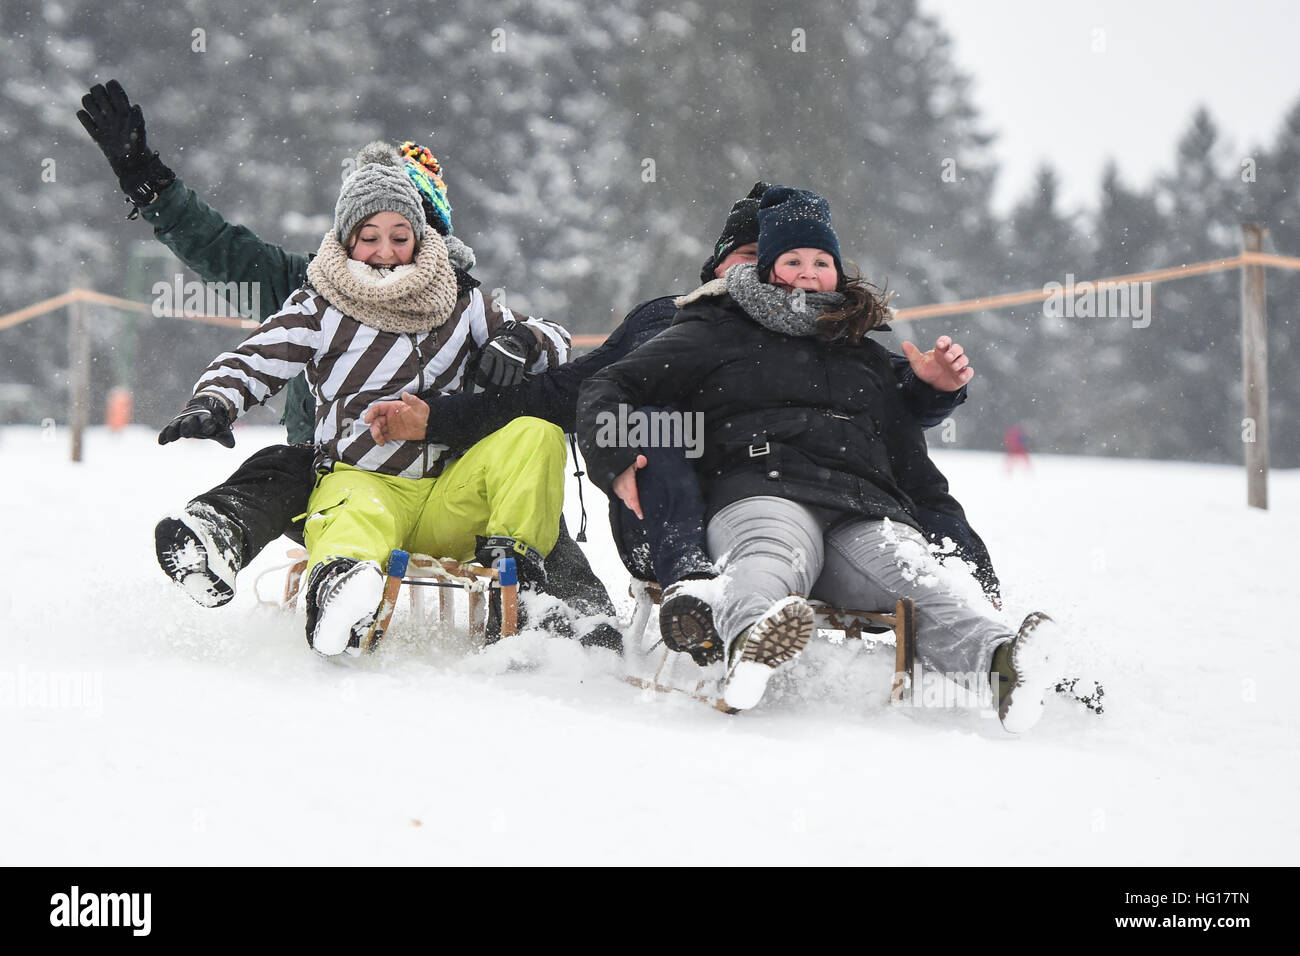 Four excursionists from Bad Saulgau, Germany sled down the hill in Isny im Allgaeu, Germany, 04 January 2017. Stock Photo